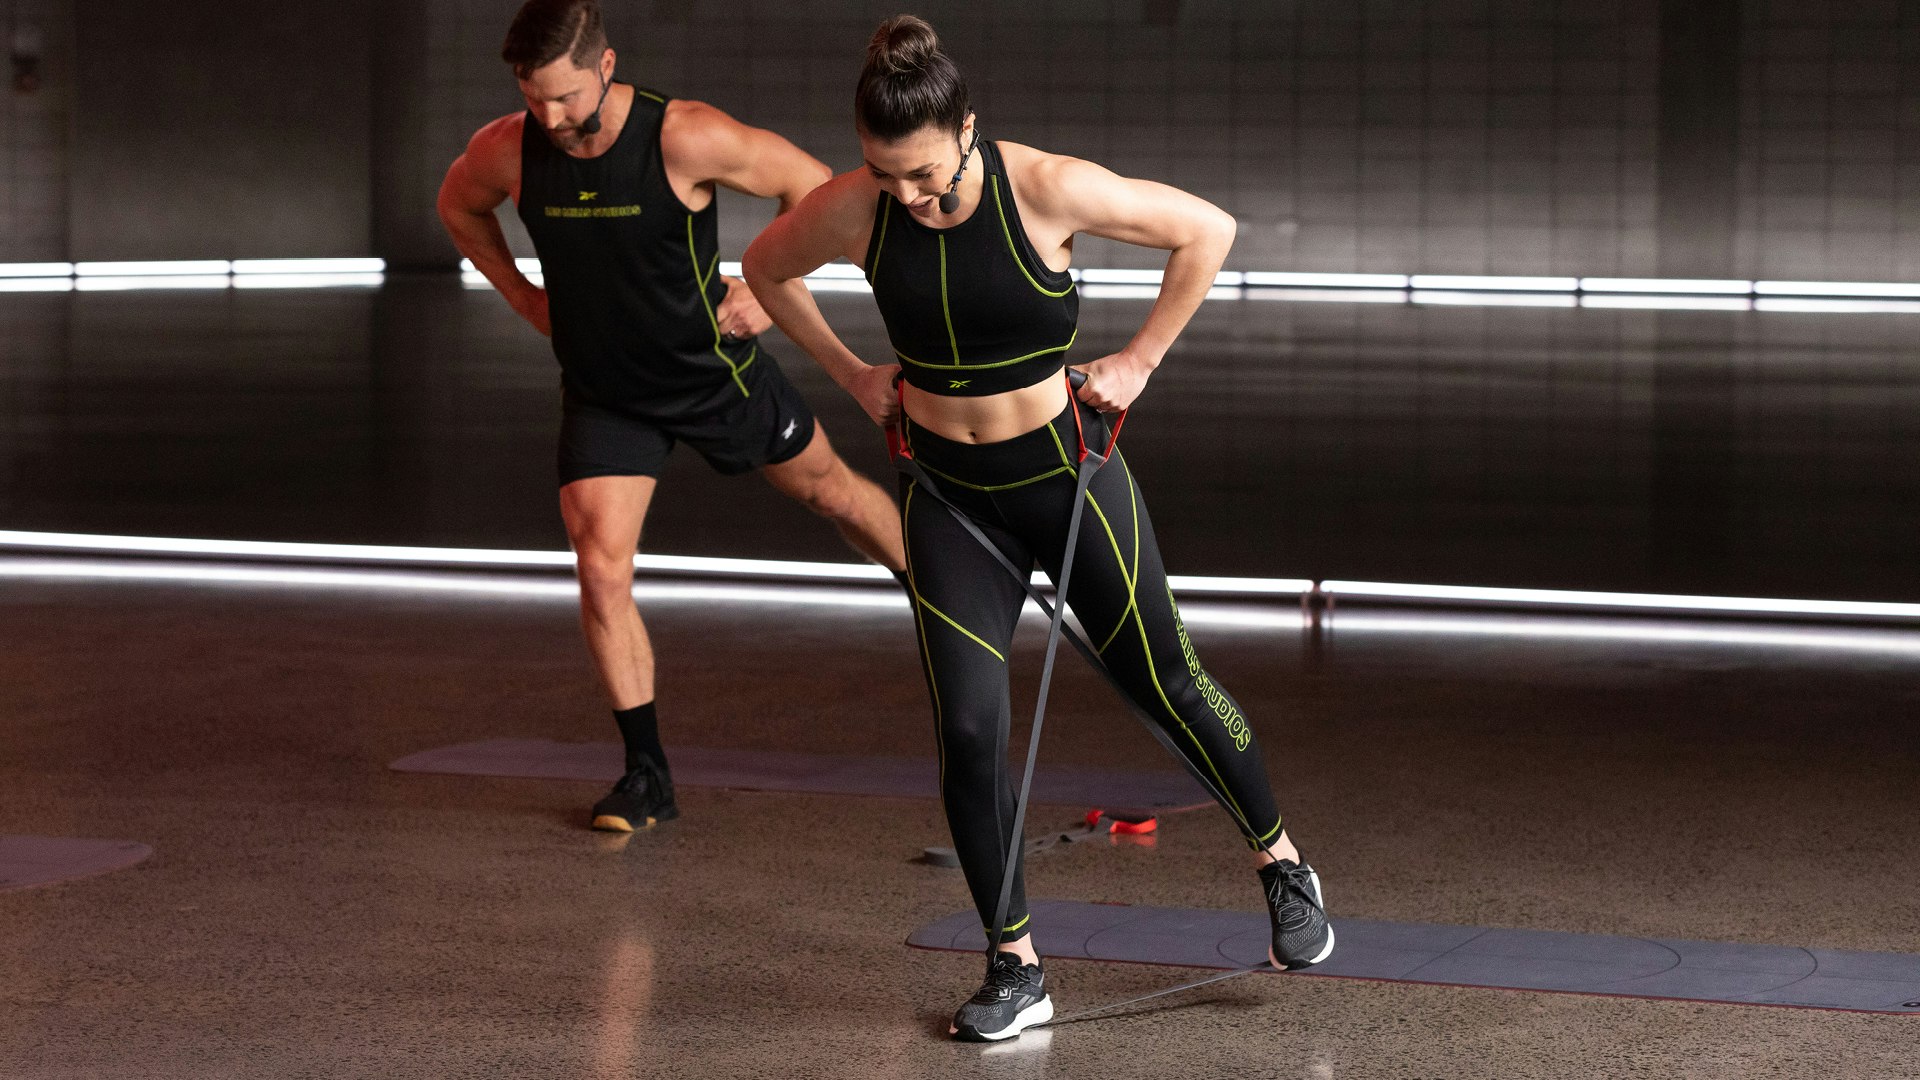 LES MILLS GRIT™ Cardio is a 30-minute high-intensity interval